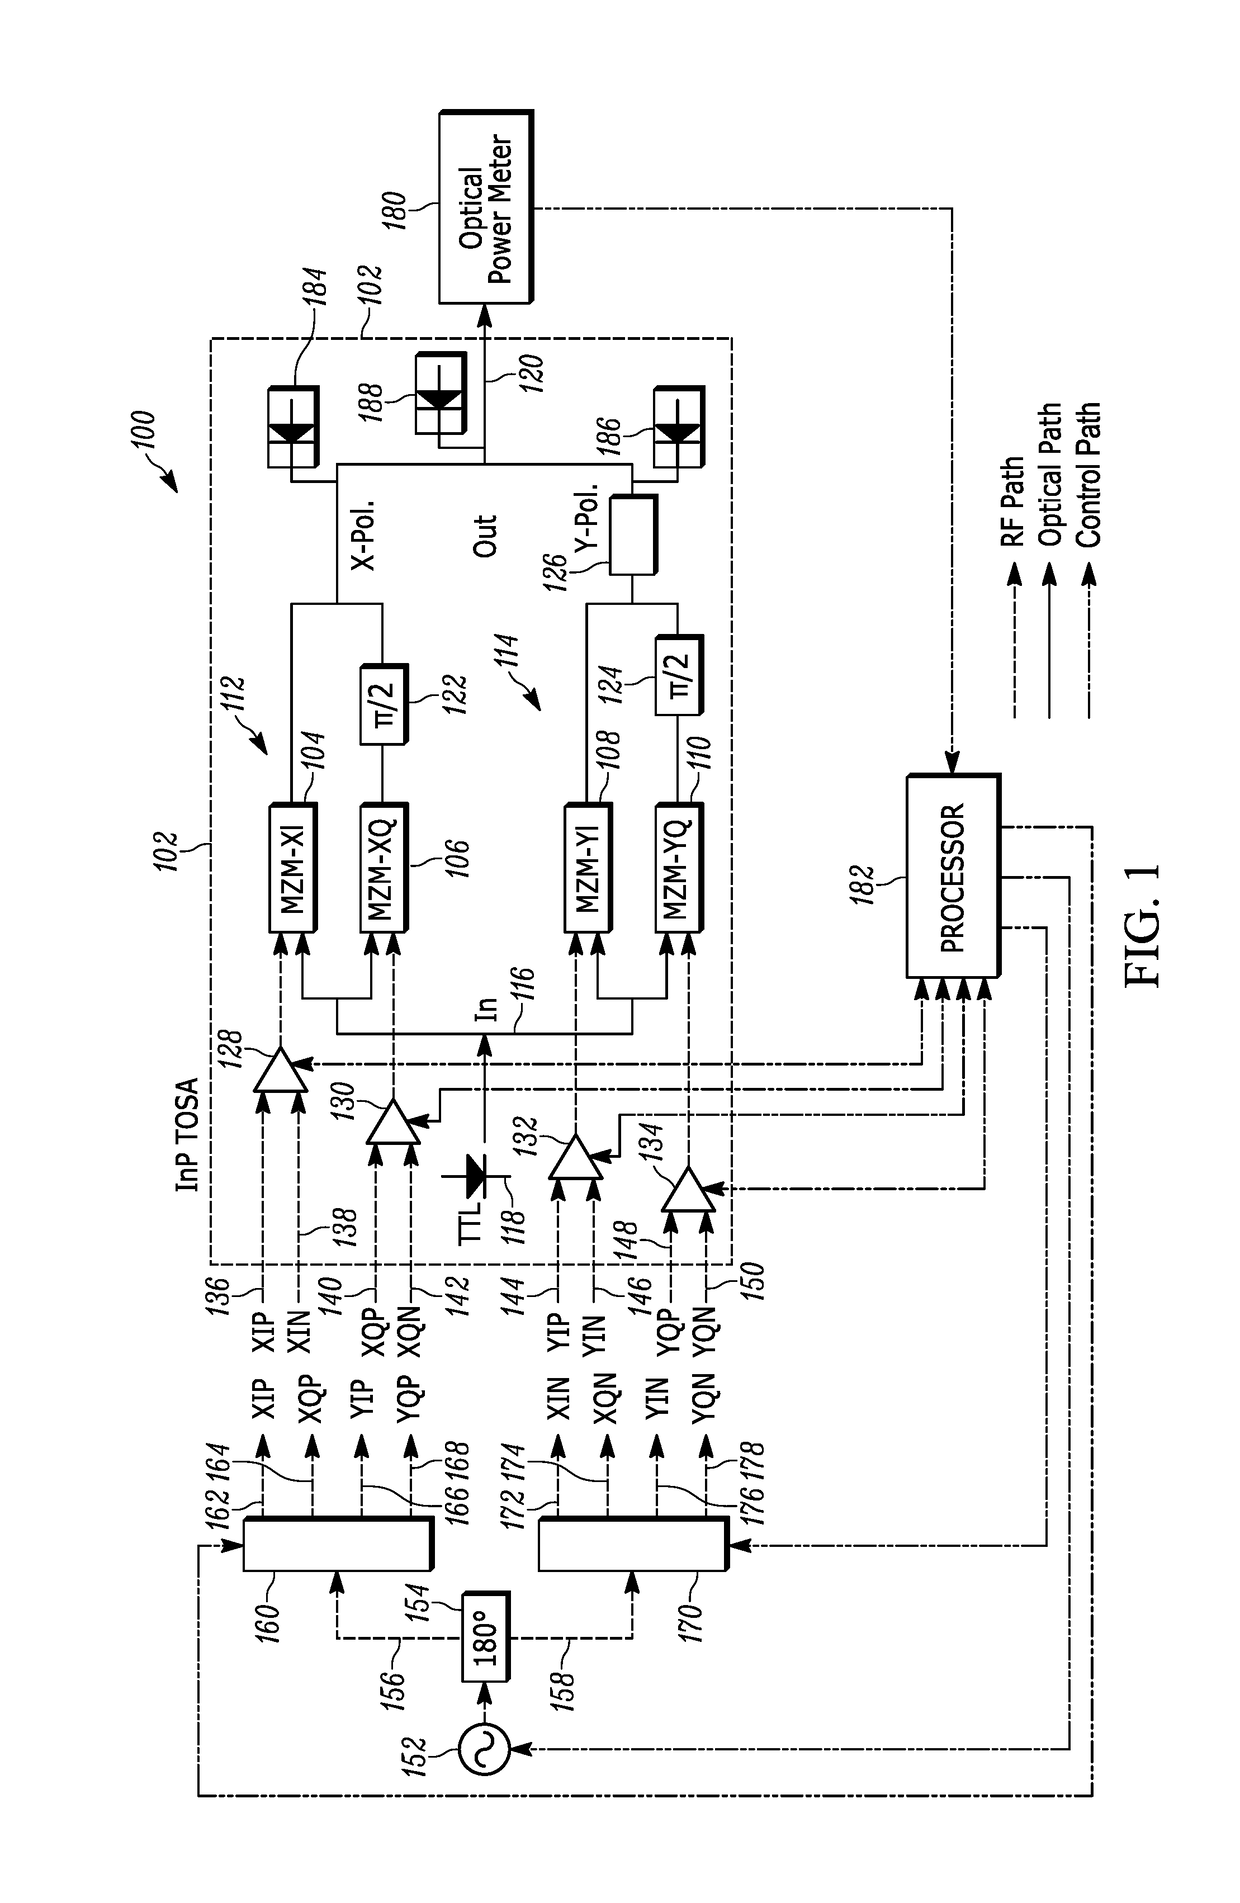 Method and apparatus for characterization and compensation of optical impairments in InP-based optical transmitter